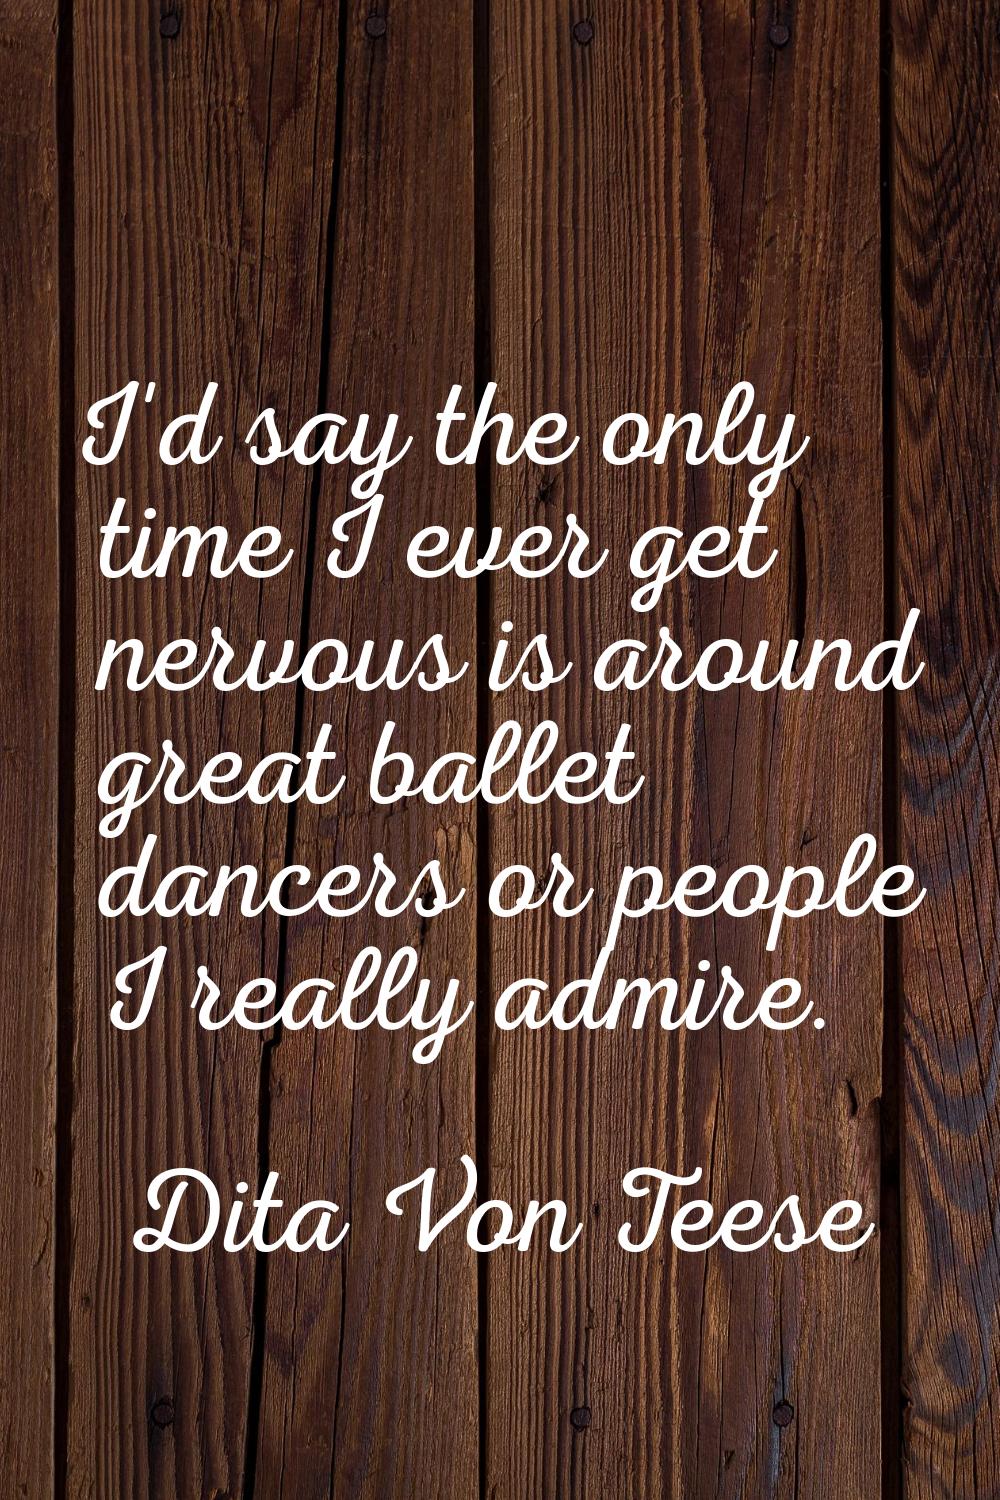 I'd say the only time I ever get nervous is around great ballet dancers or people I really admire.